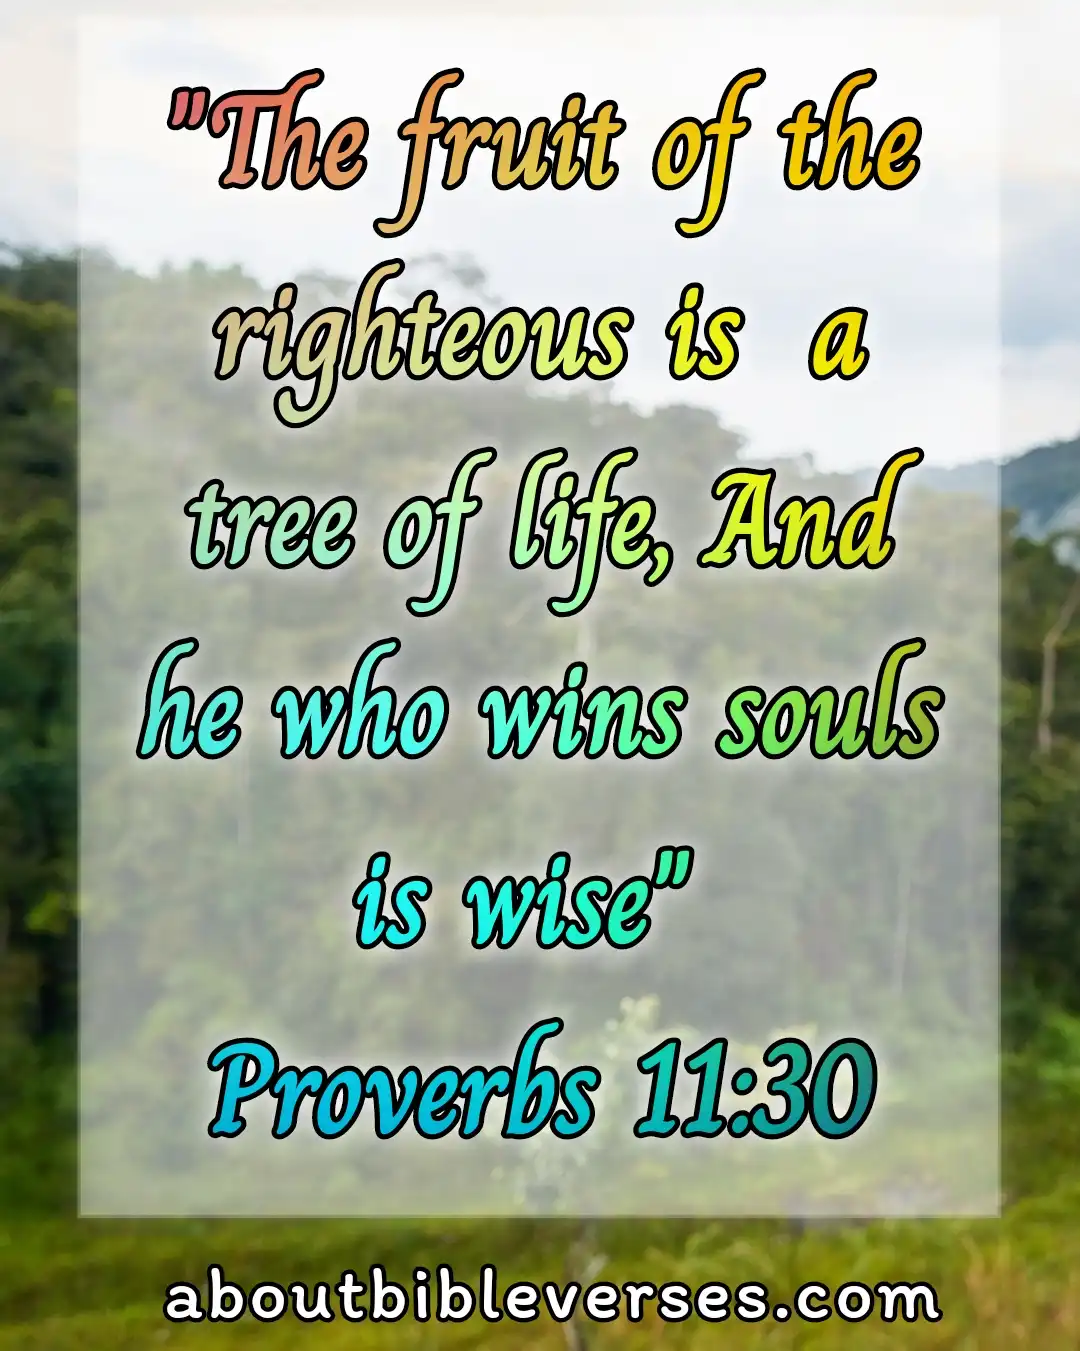 bible verses about wisdom (Proverbs 11:30)